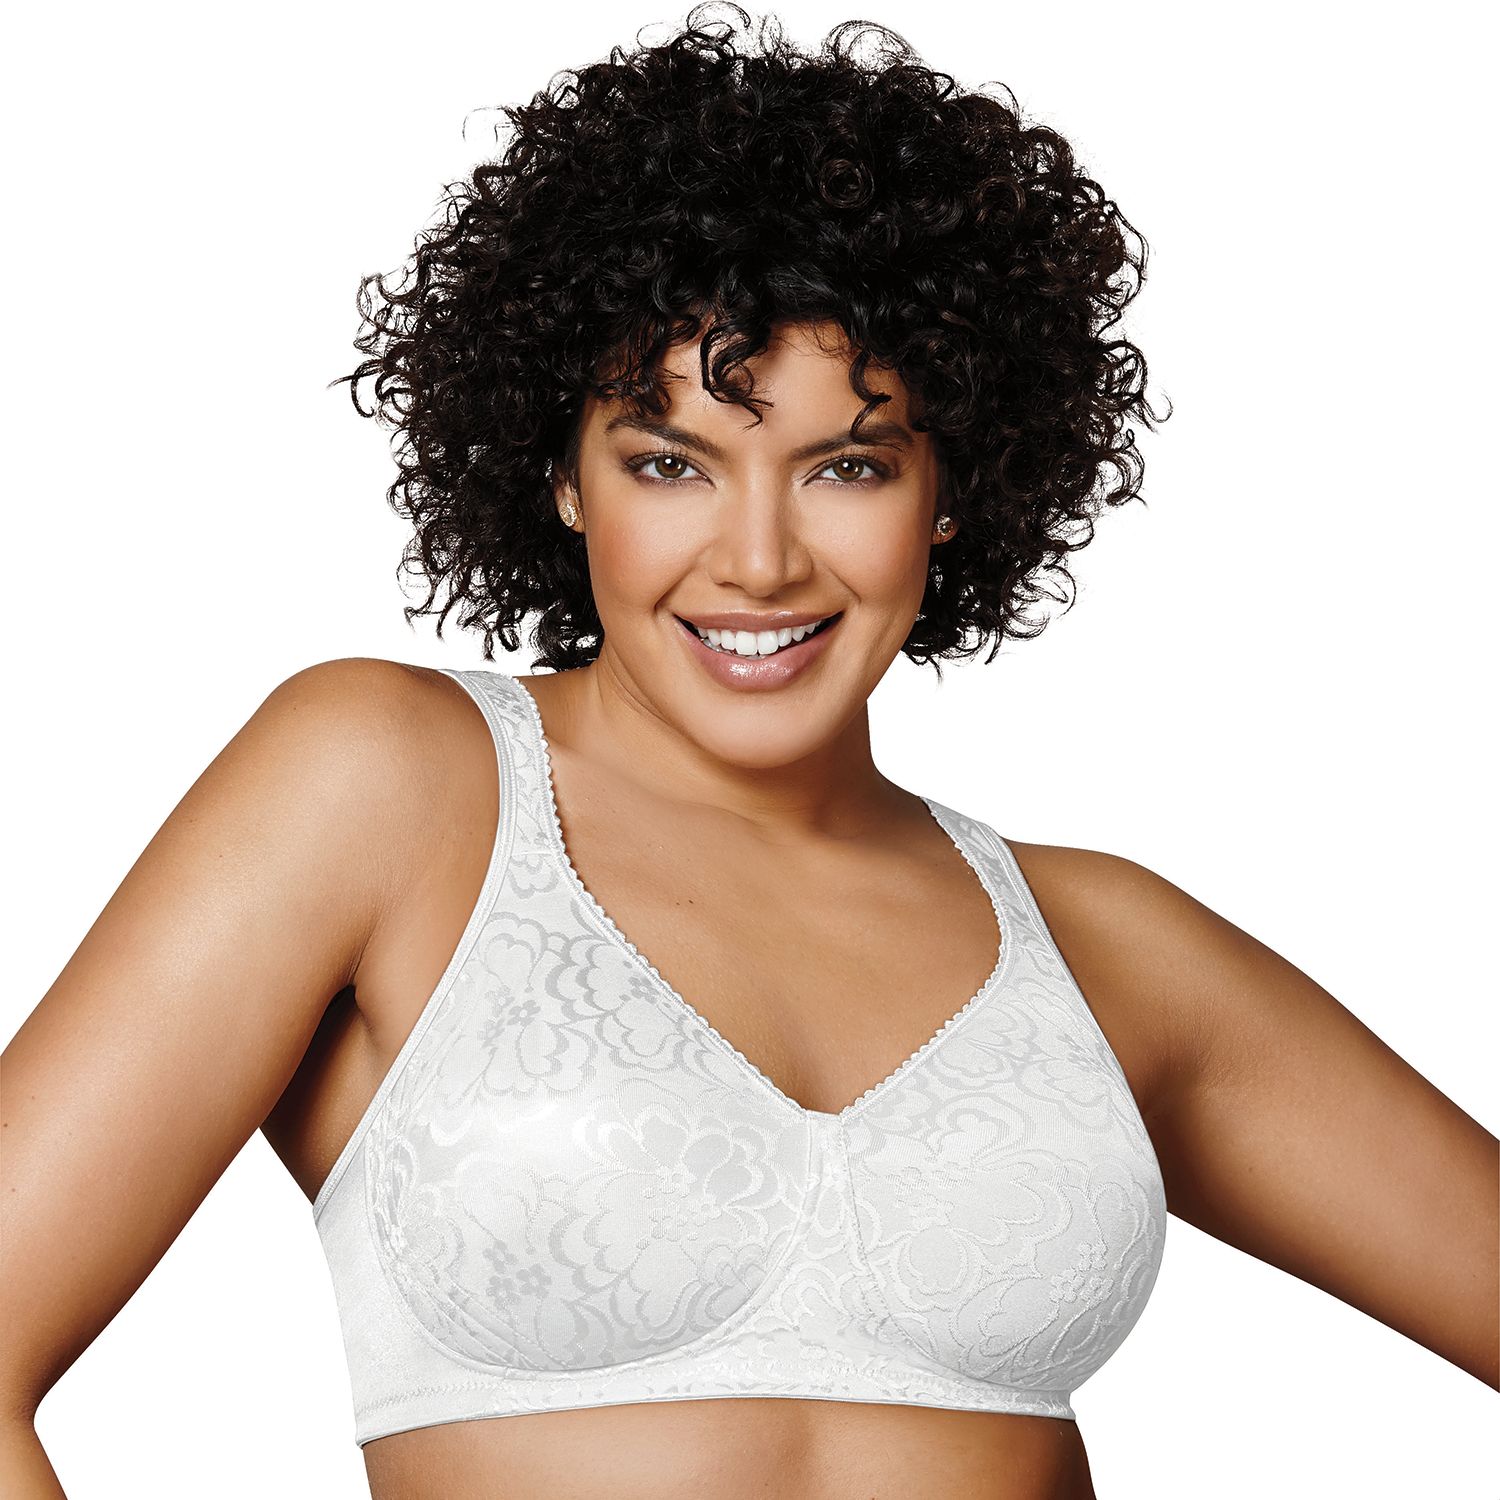 playtex 18 hour ultimate lift & support cotton bra